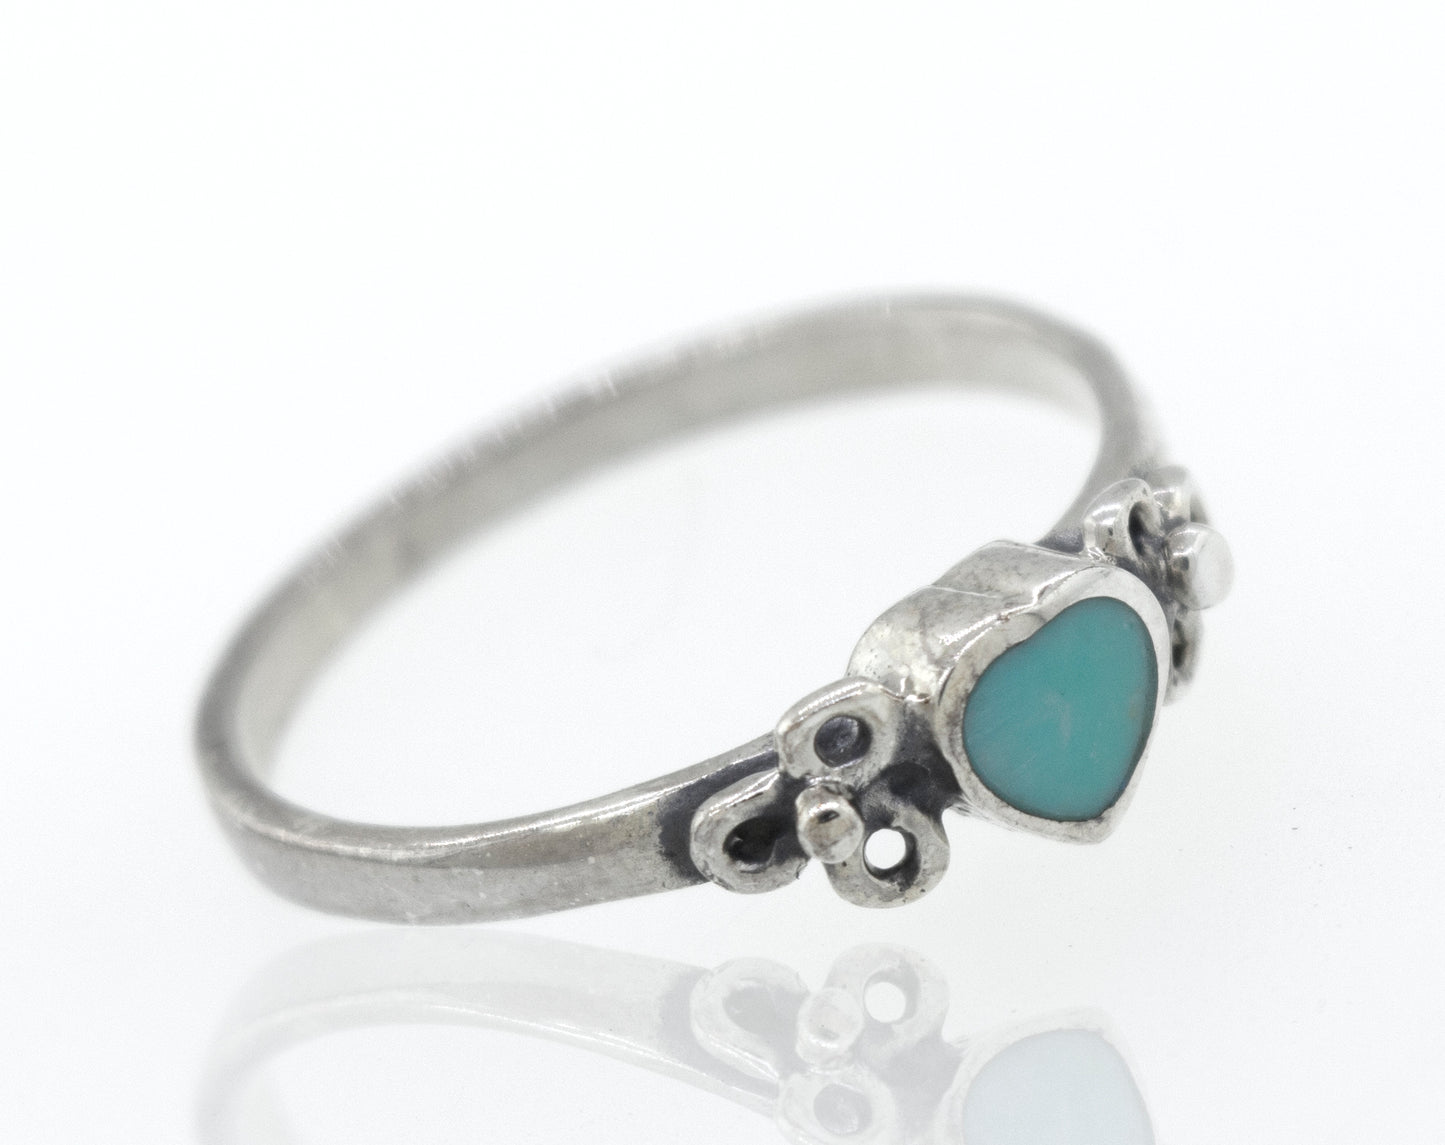 A sterling silver ring with a Turquoise Heart Ring With Flower Designs stone.